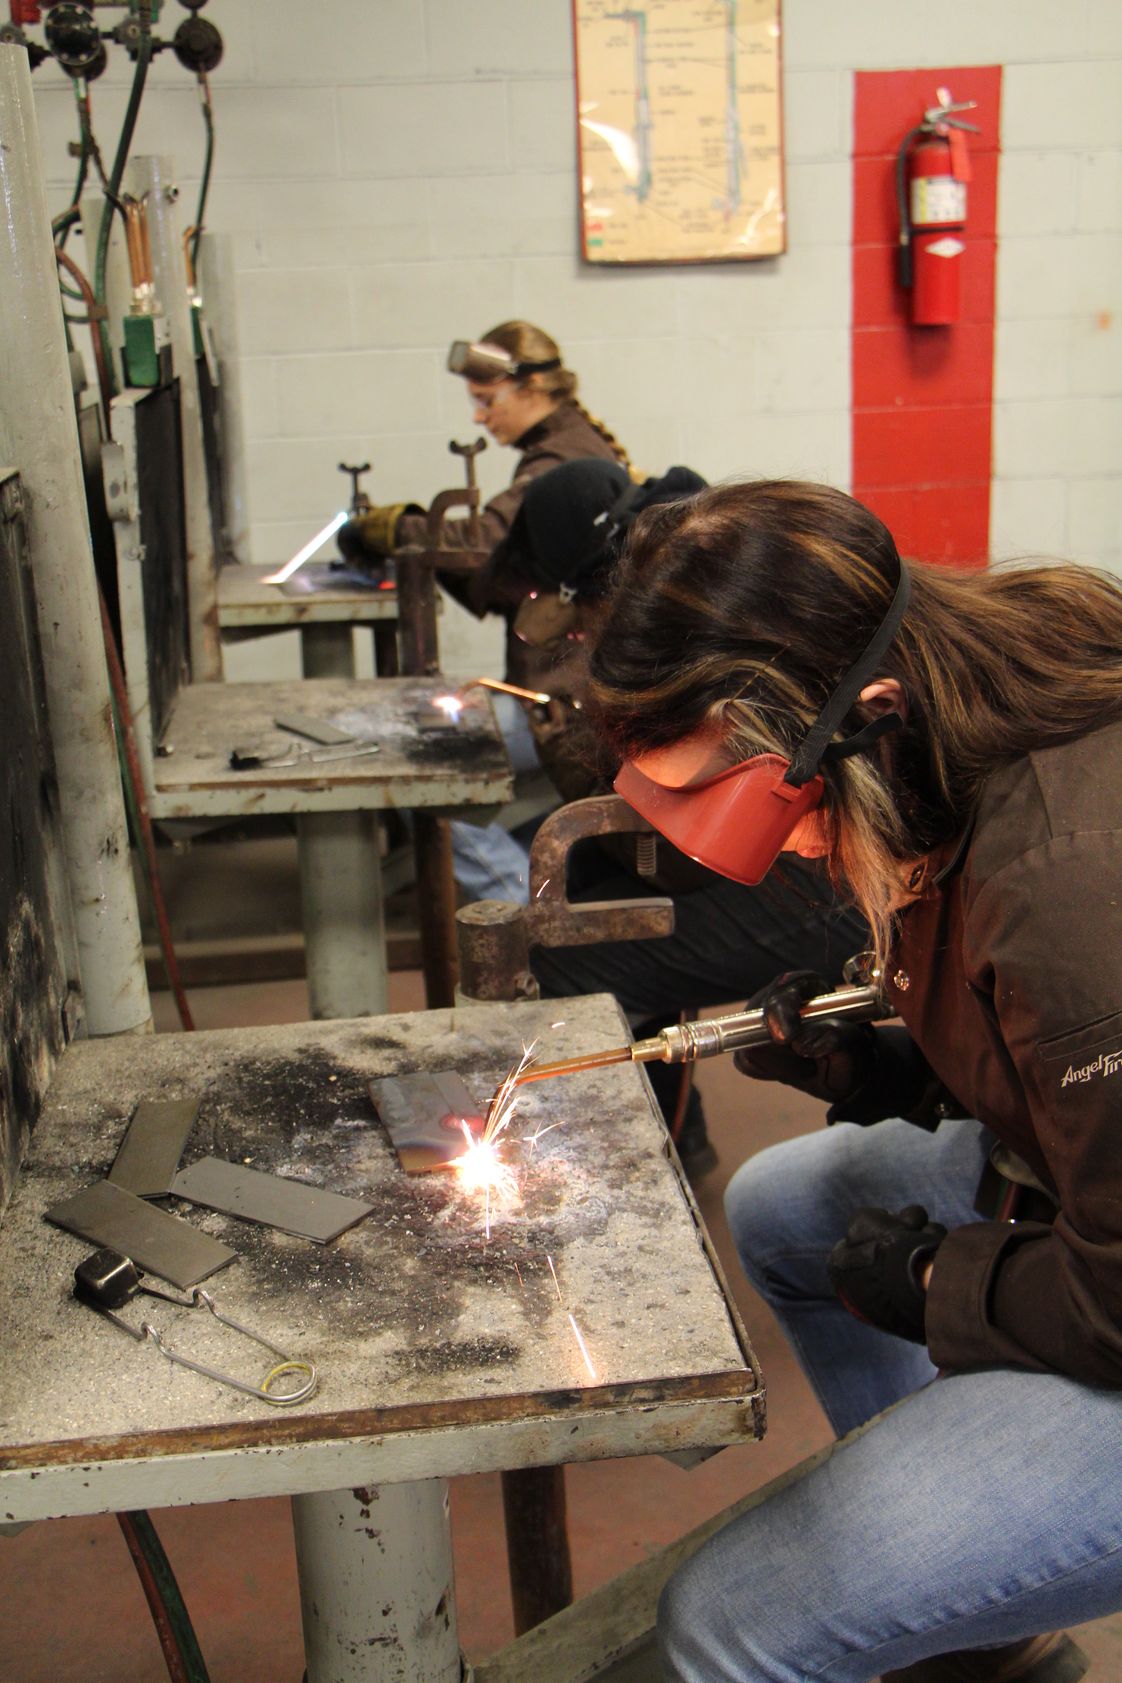 Dunwoody College of Technology Photo #1 - Welding students in a Dunwoody classroom/workshop